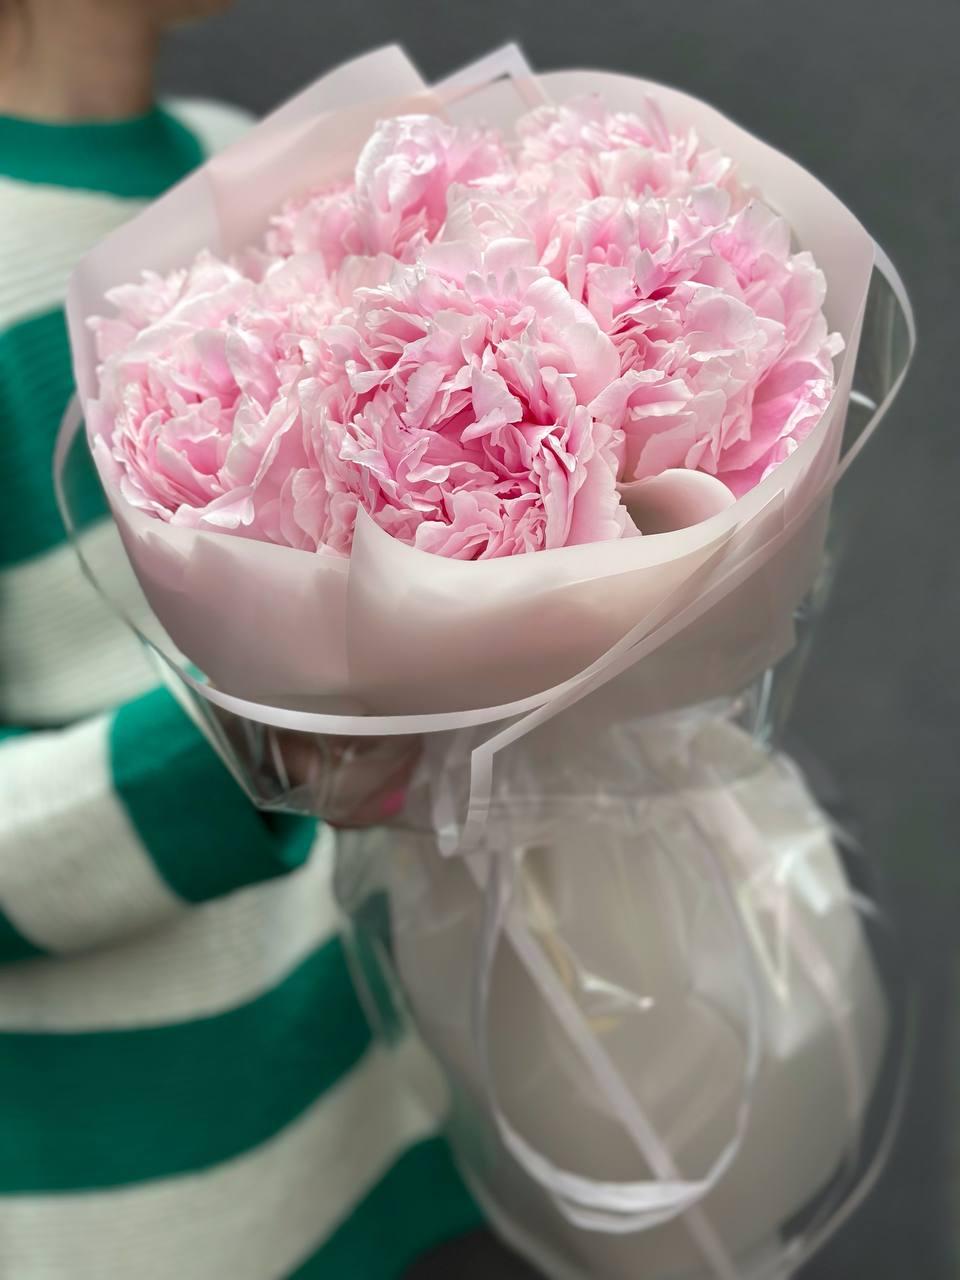 Bouquet of peonies "Marshmallow 7"